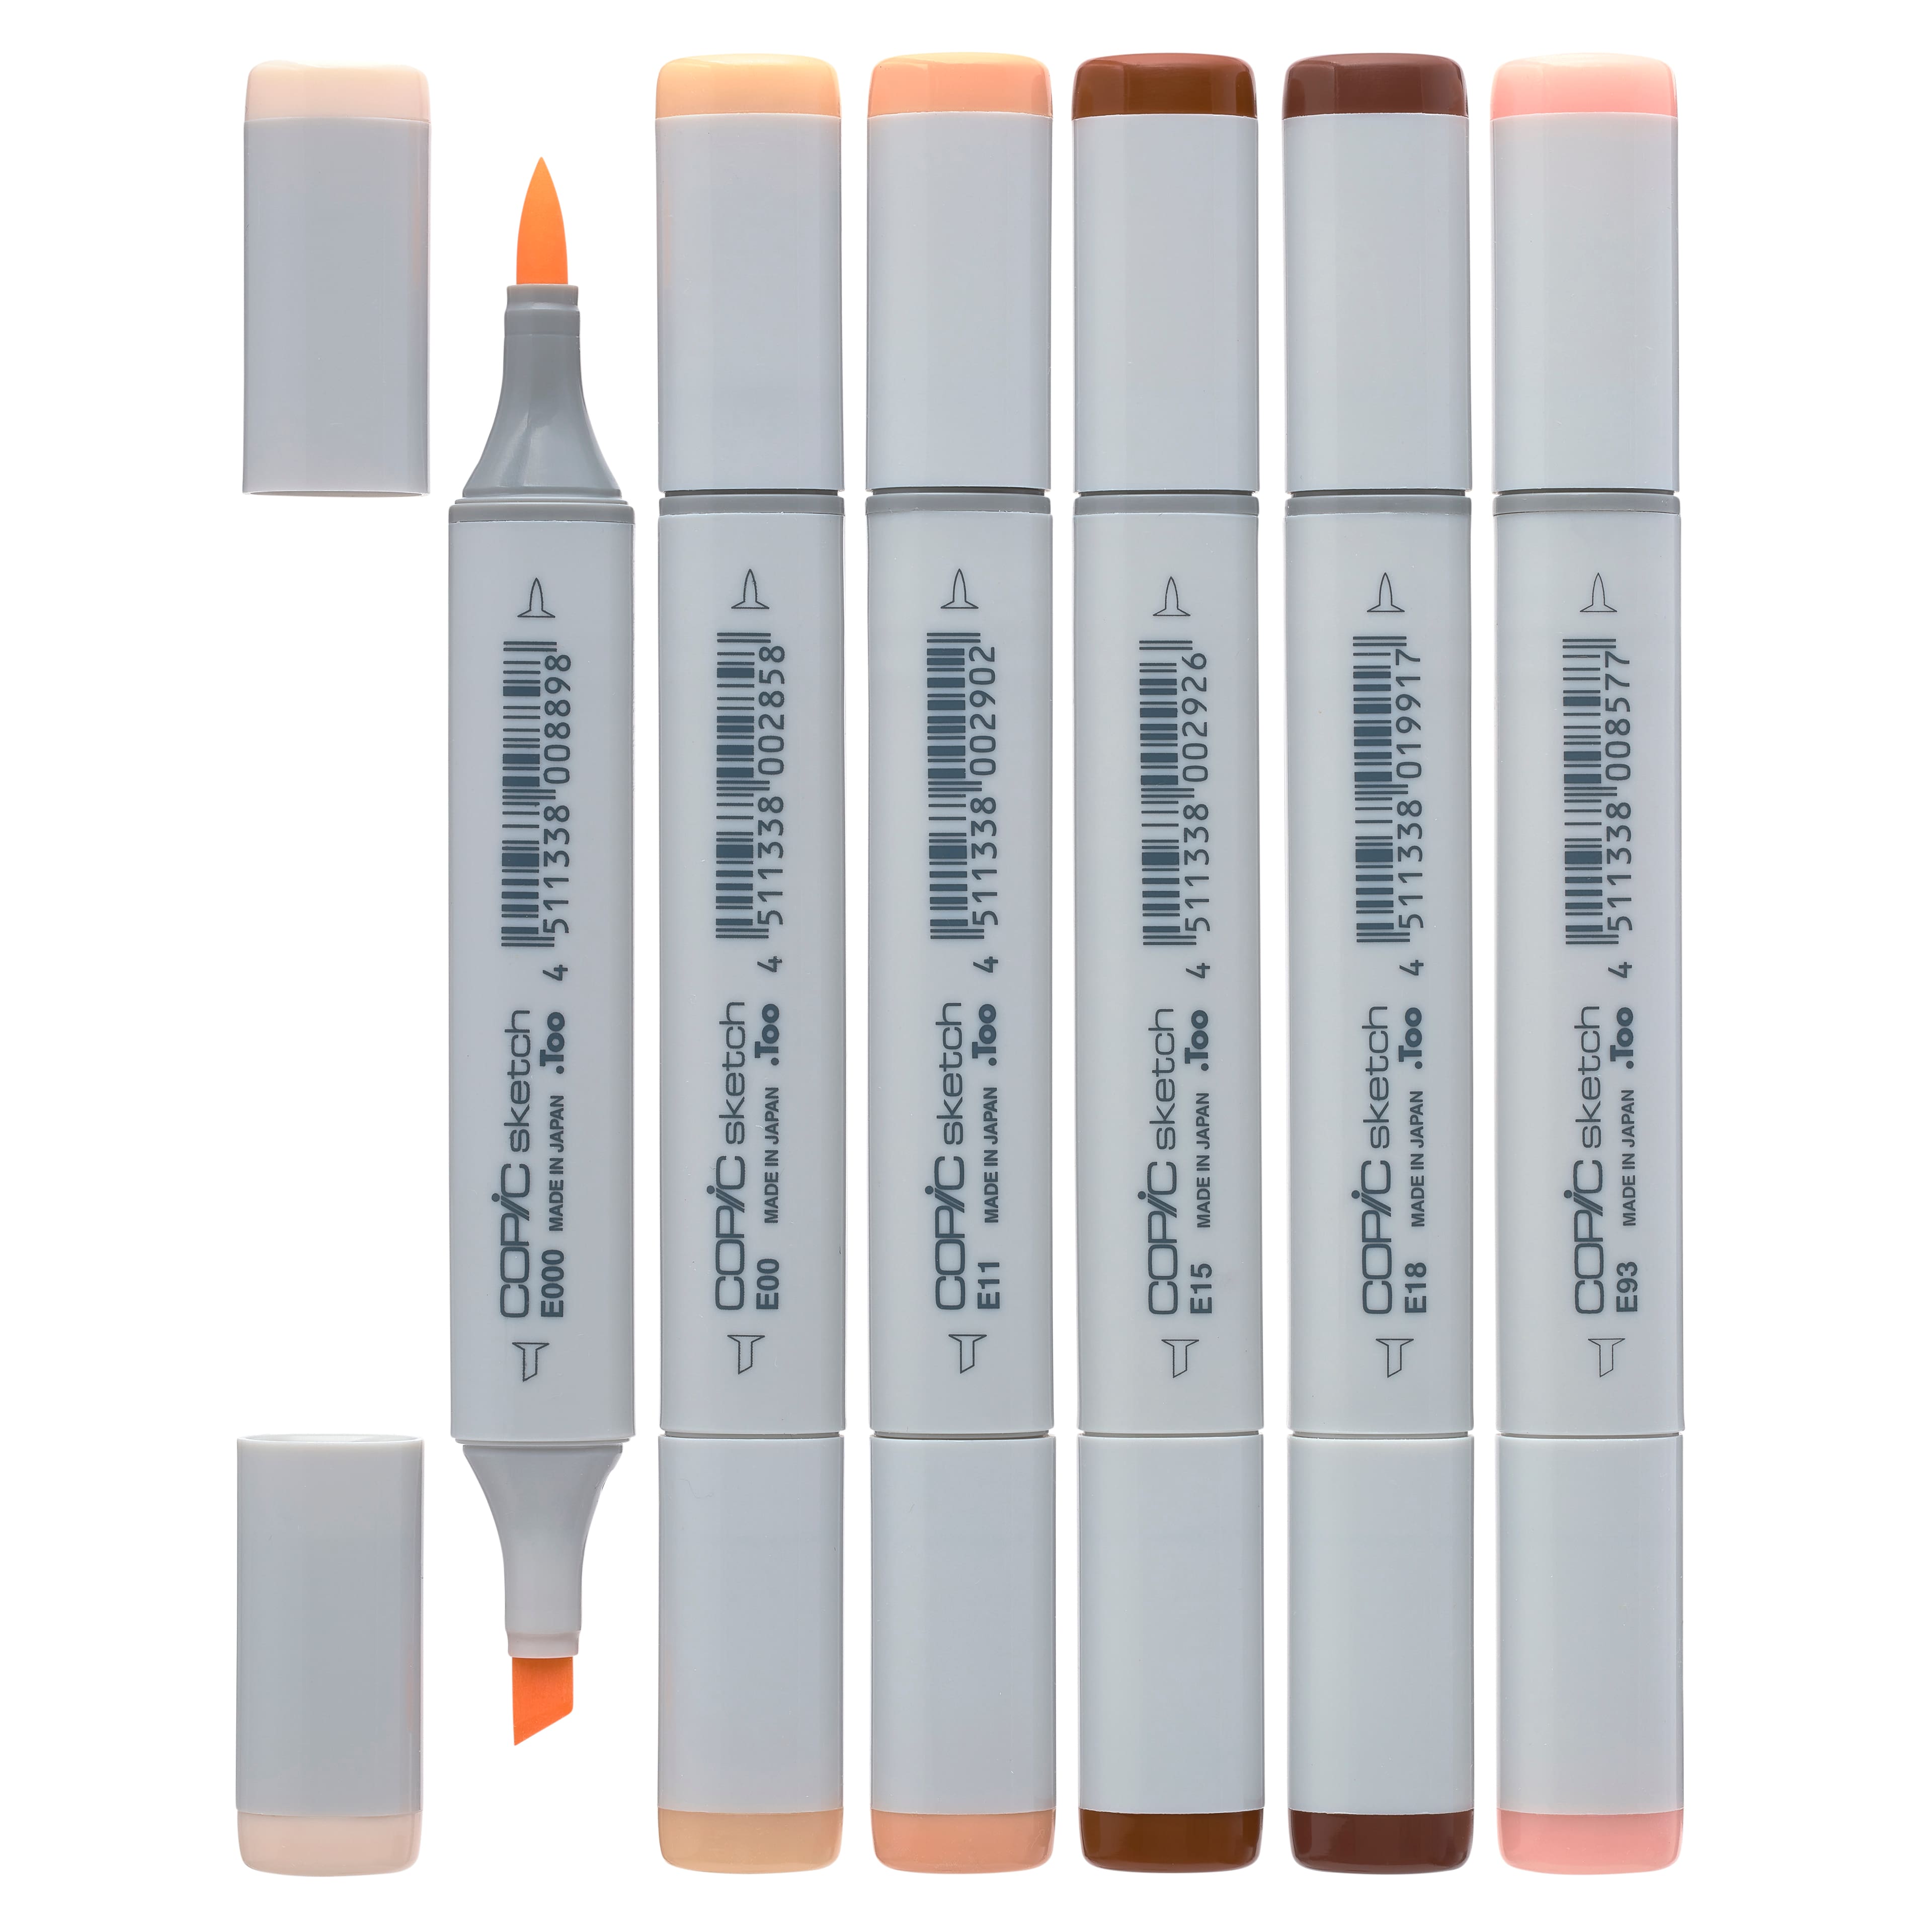 6 Packs 6 ct 36 total Copic Ciao Marker Set Pastels  Michaels